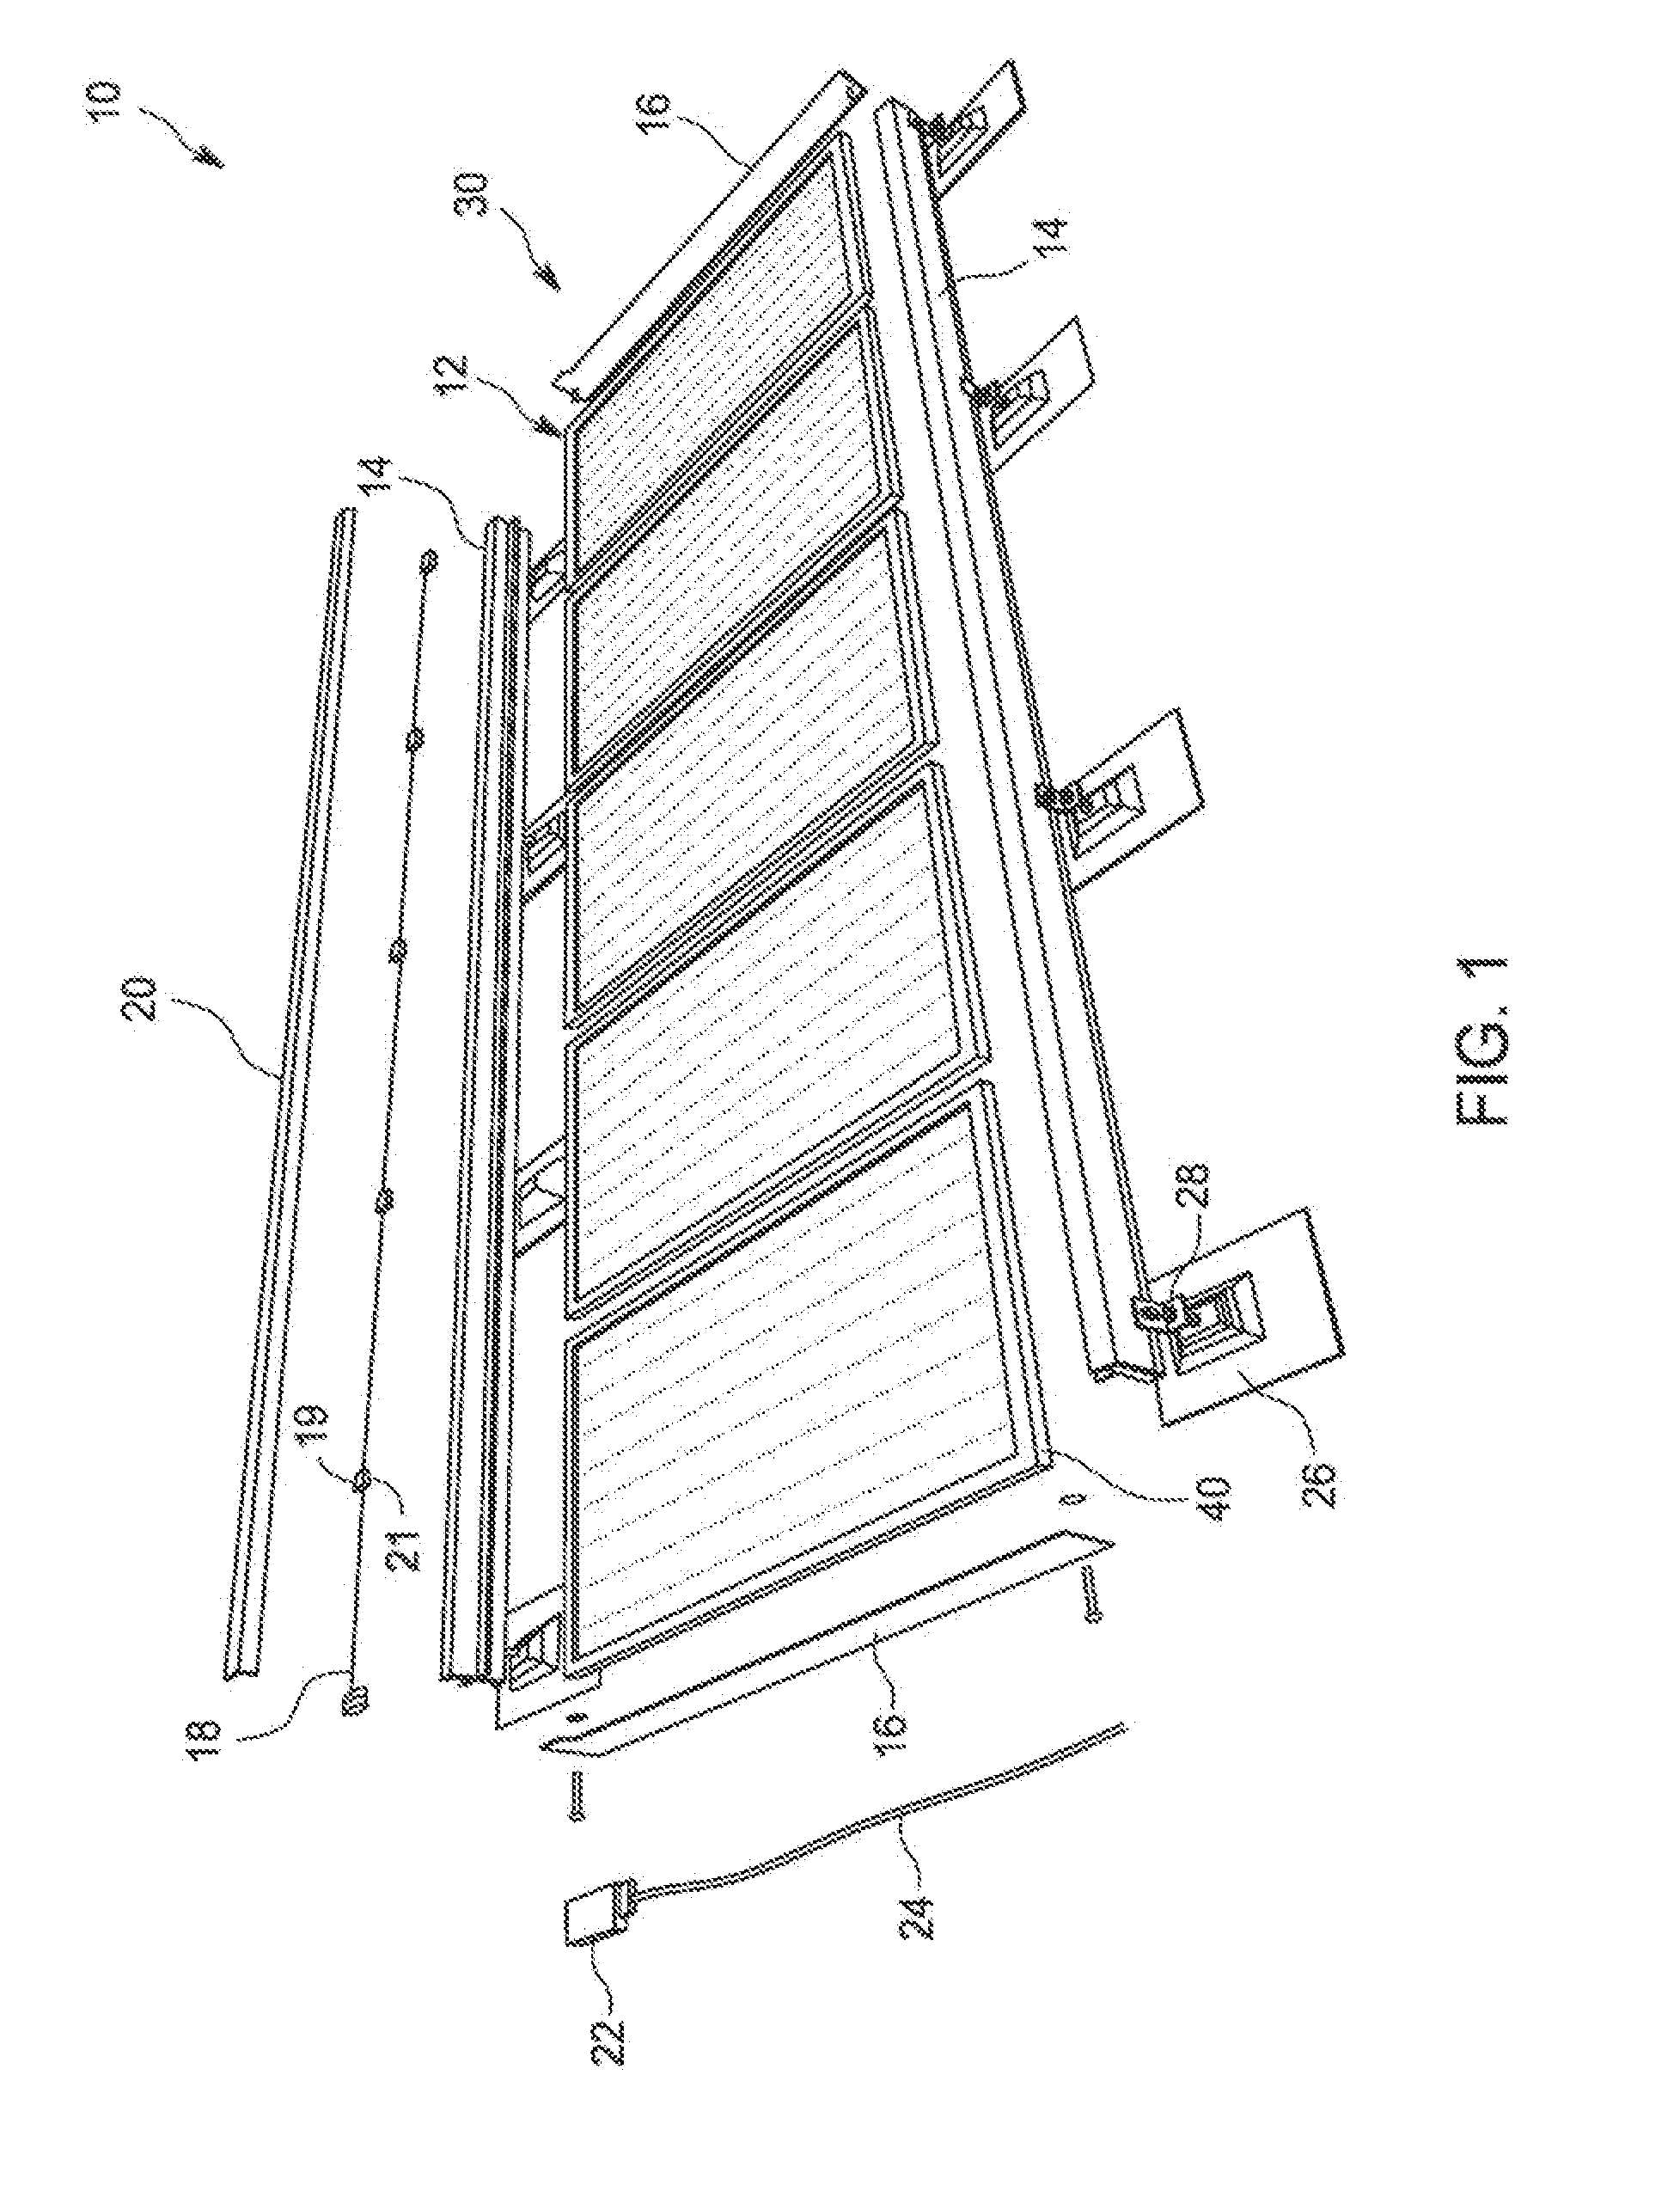 Photovoltaic mounting system with grounding bars and method of installing same